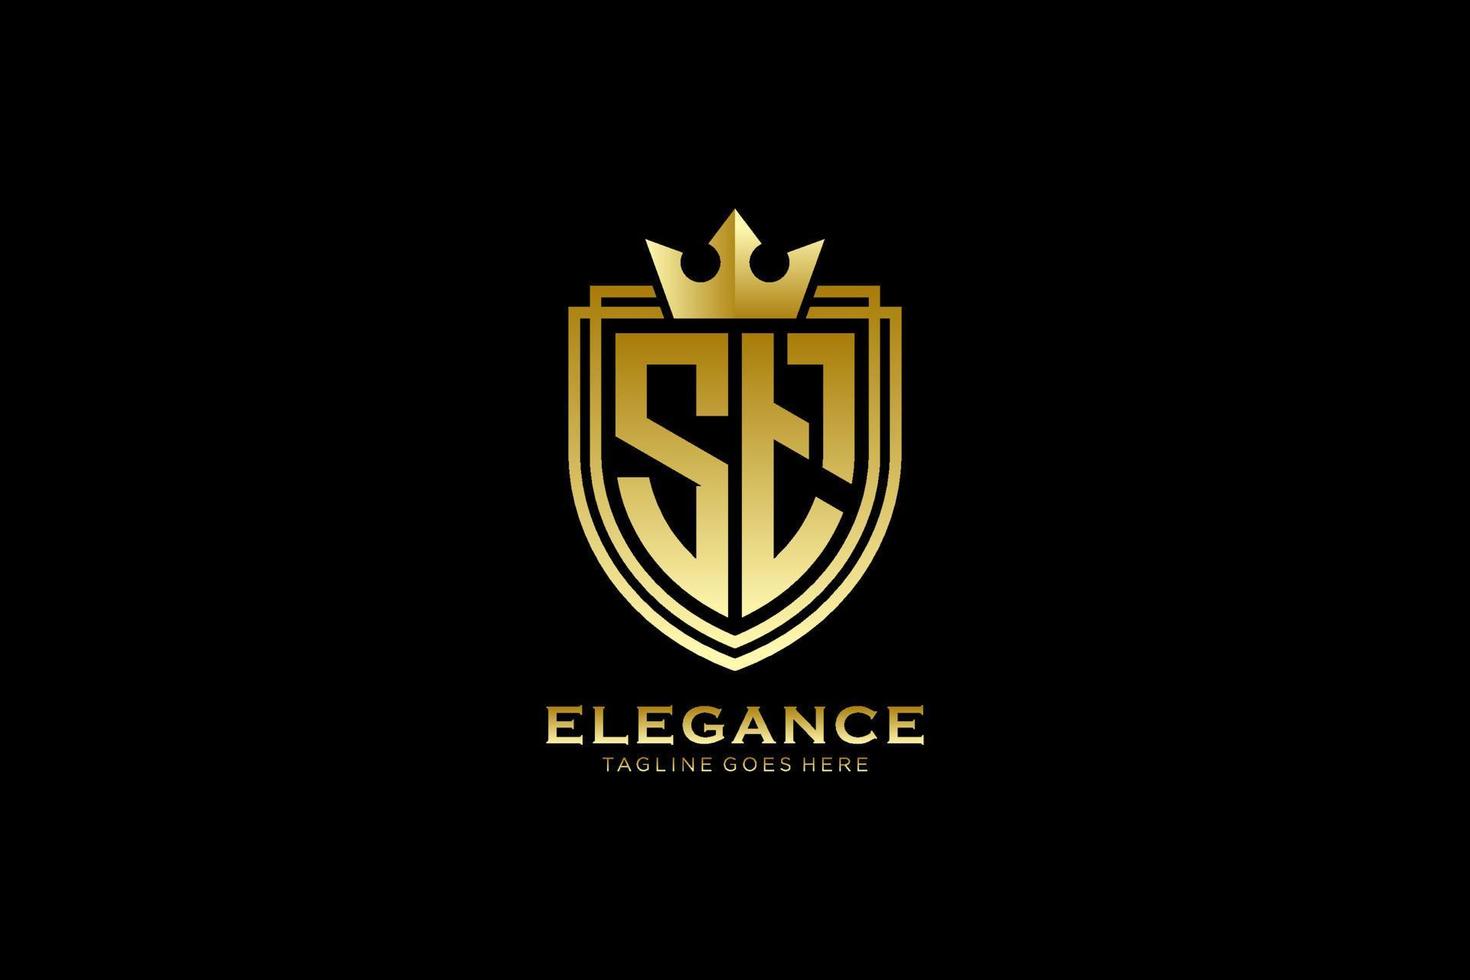 initial ST elegant luxury monogram logo or badge template with scrolls and royal crown - perfect for luxurious branding projects vector